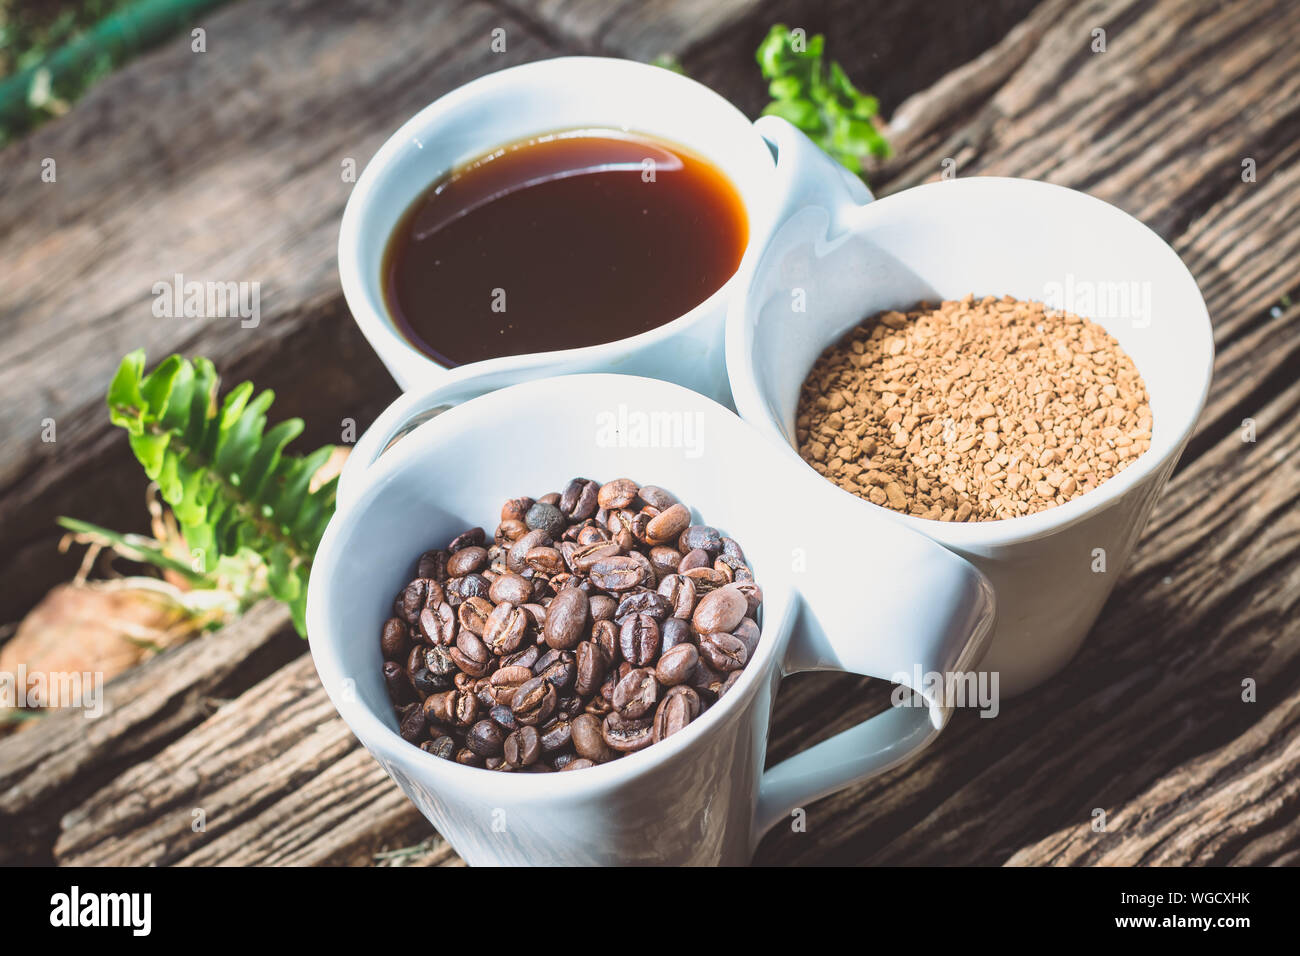 Close-up Of Coffee Cup With Roasted Beans And Caffeine In Cups On Wood Stock Photo